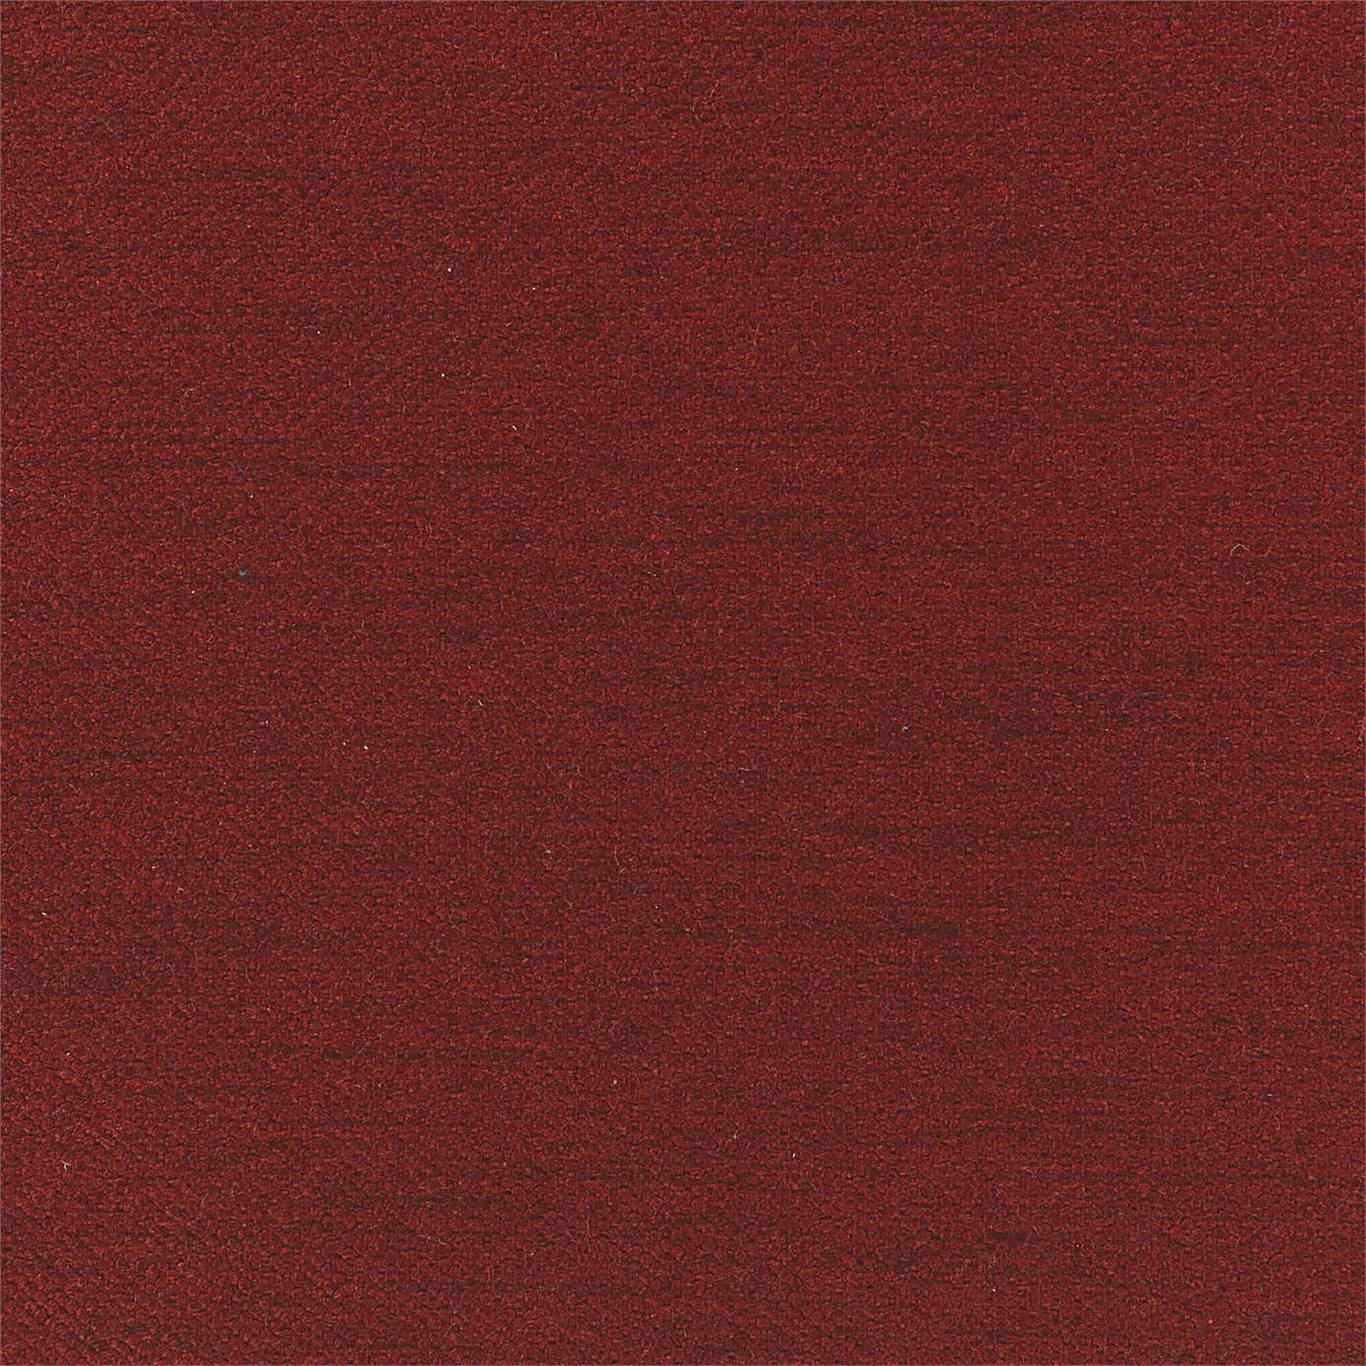 Factor Maroon Fabric by HAR